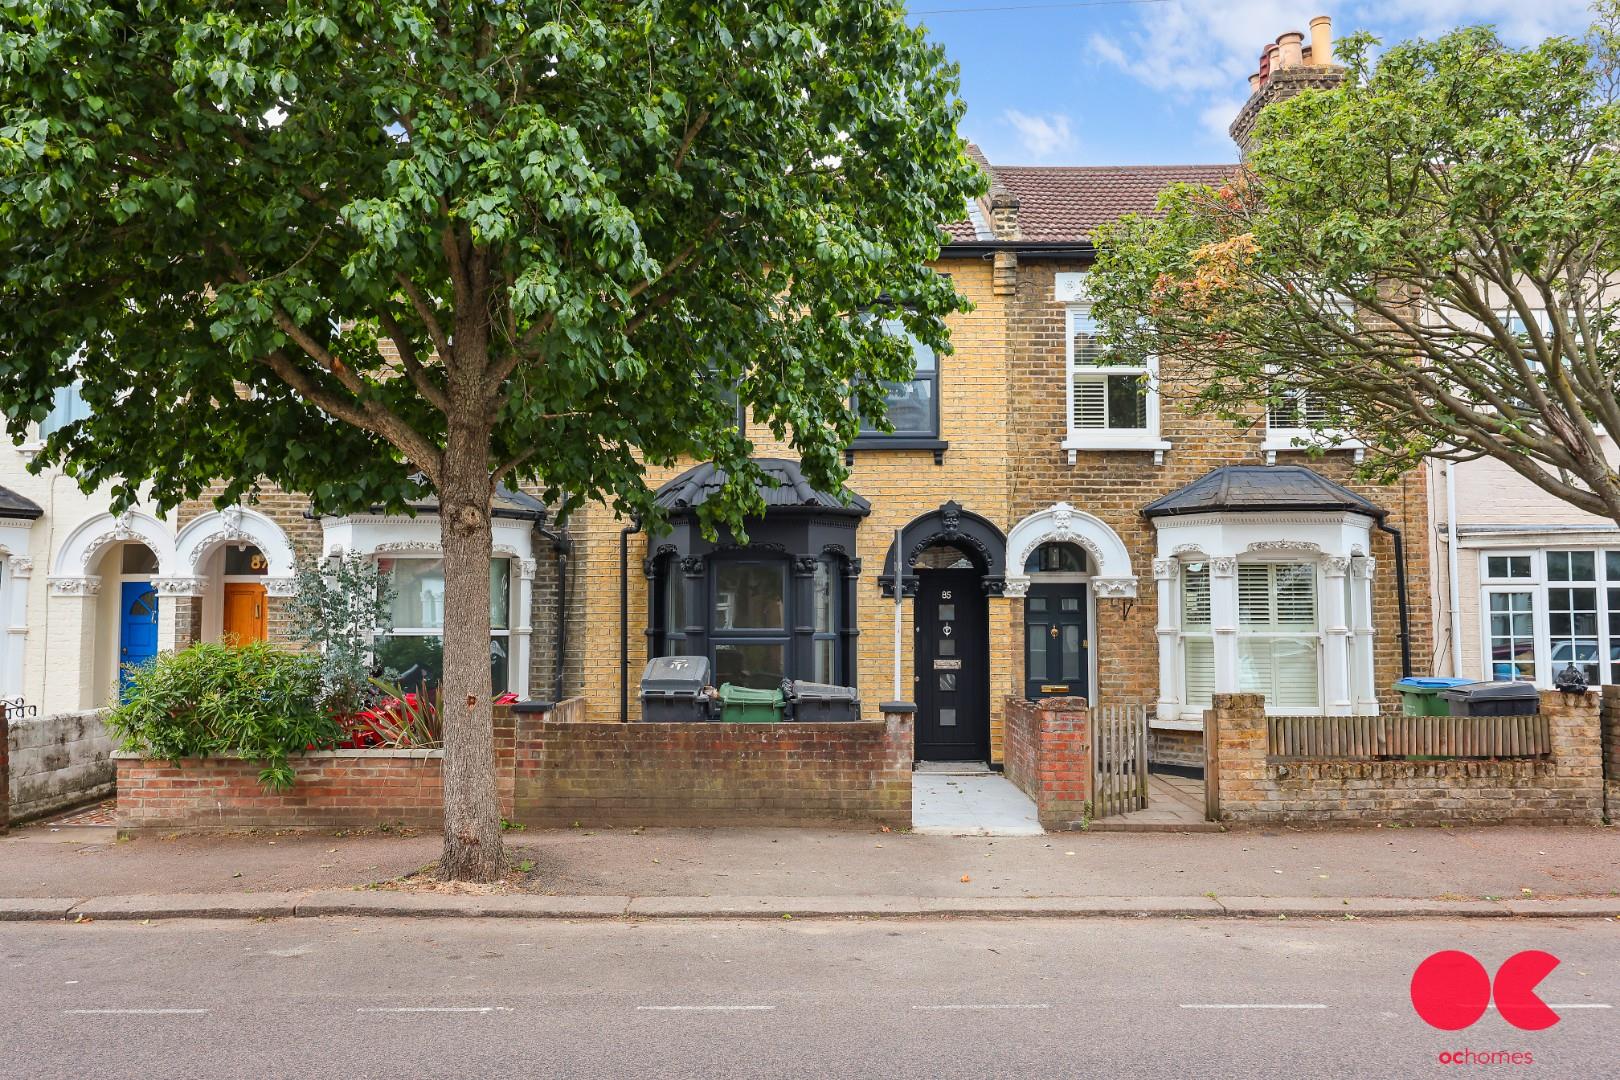 3 bed terraced house for sale in Selby Road, Leytonstone - Property Image 1